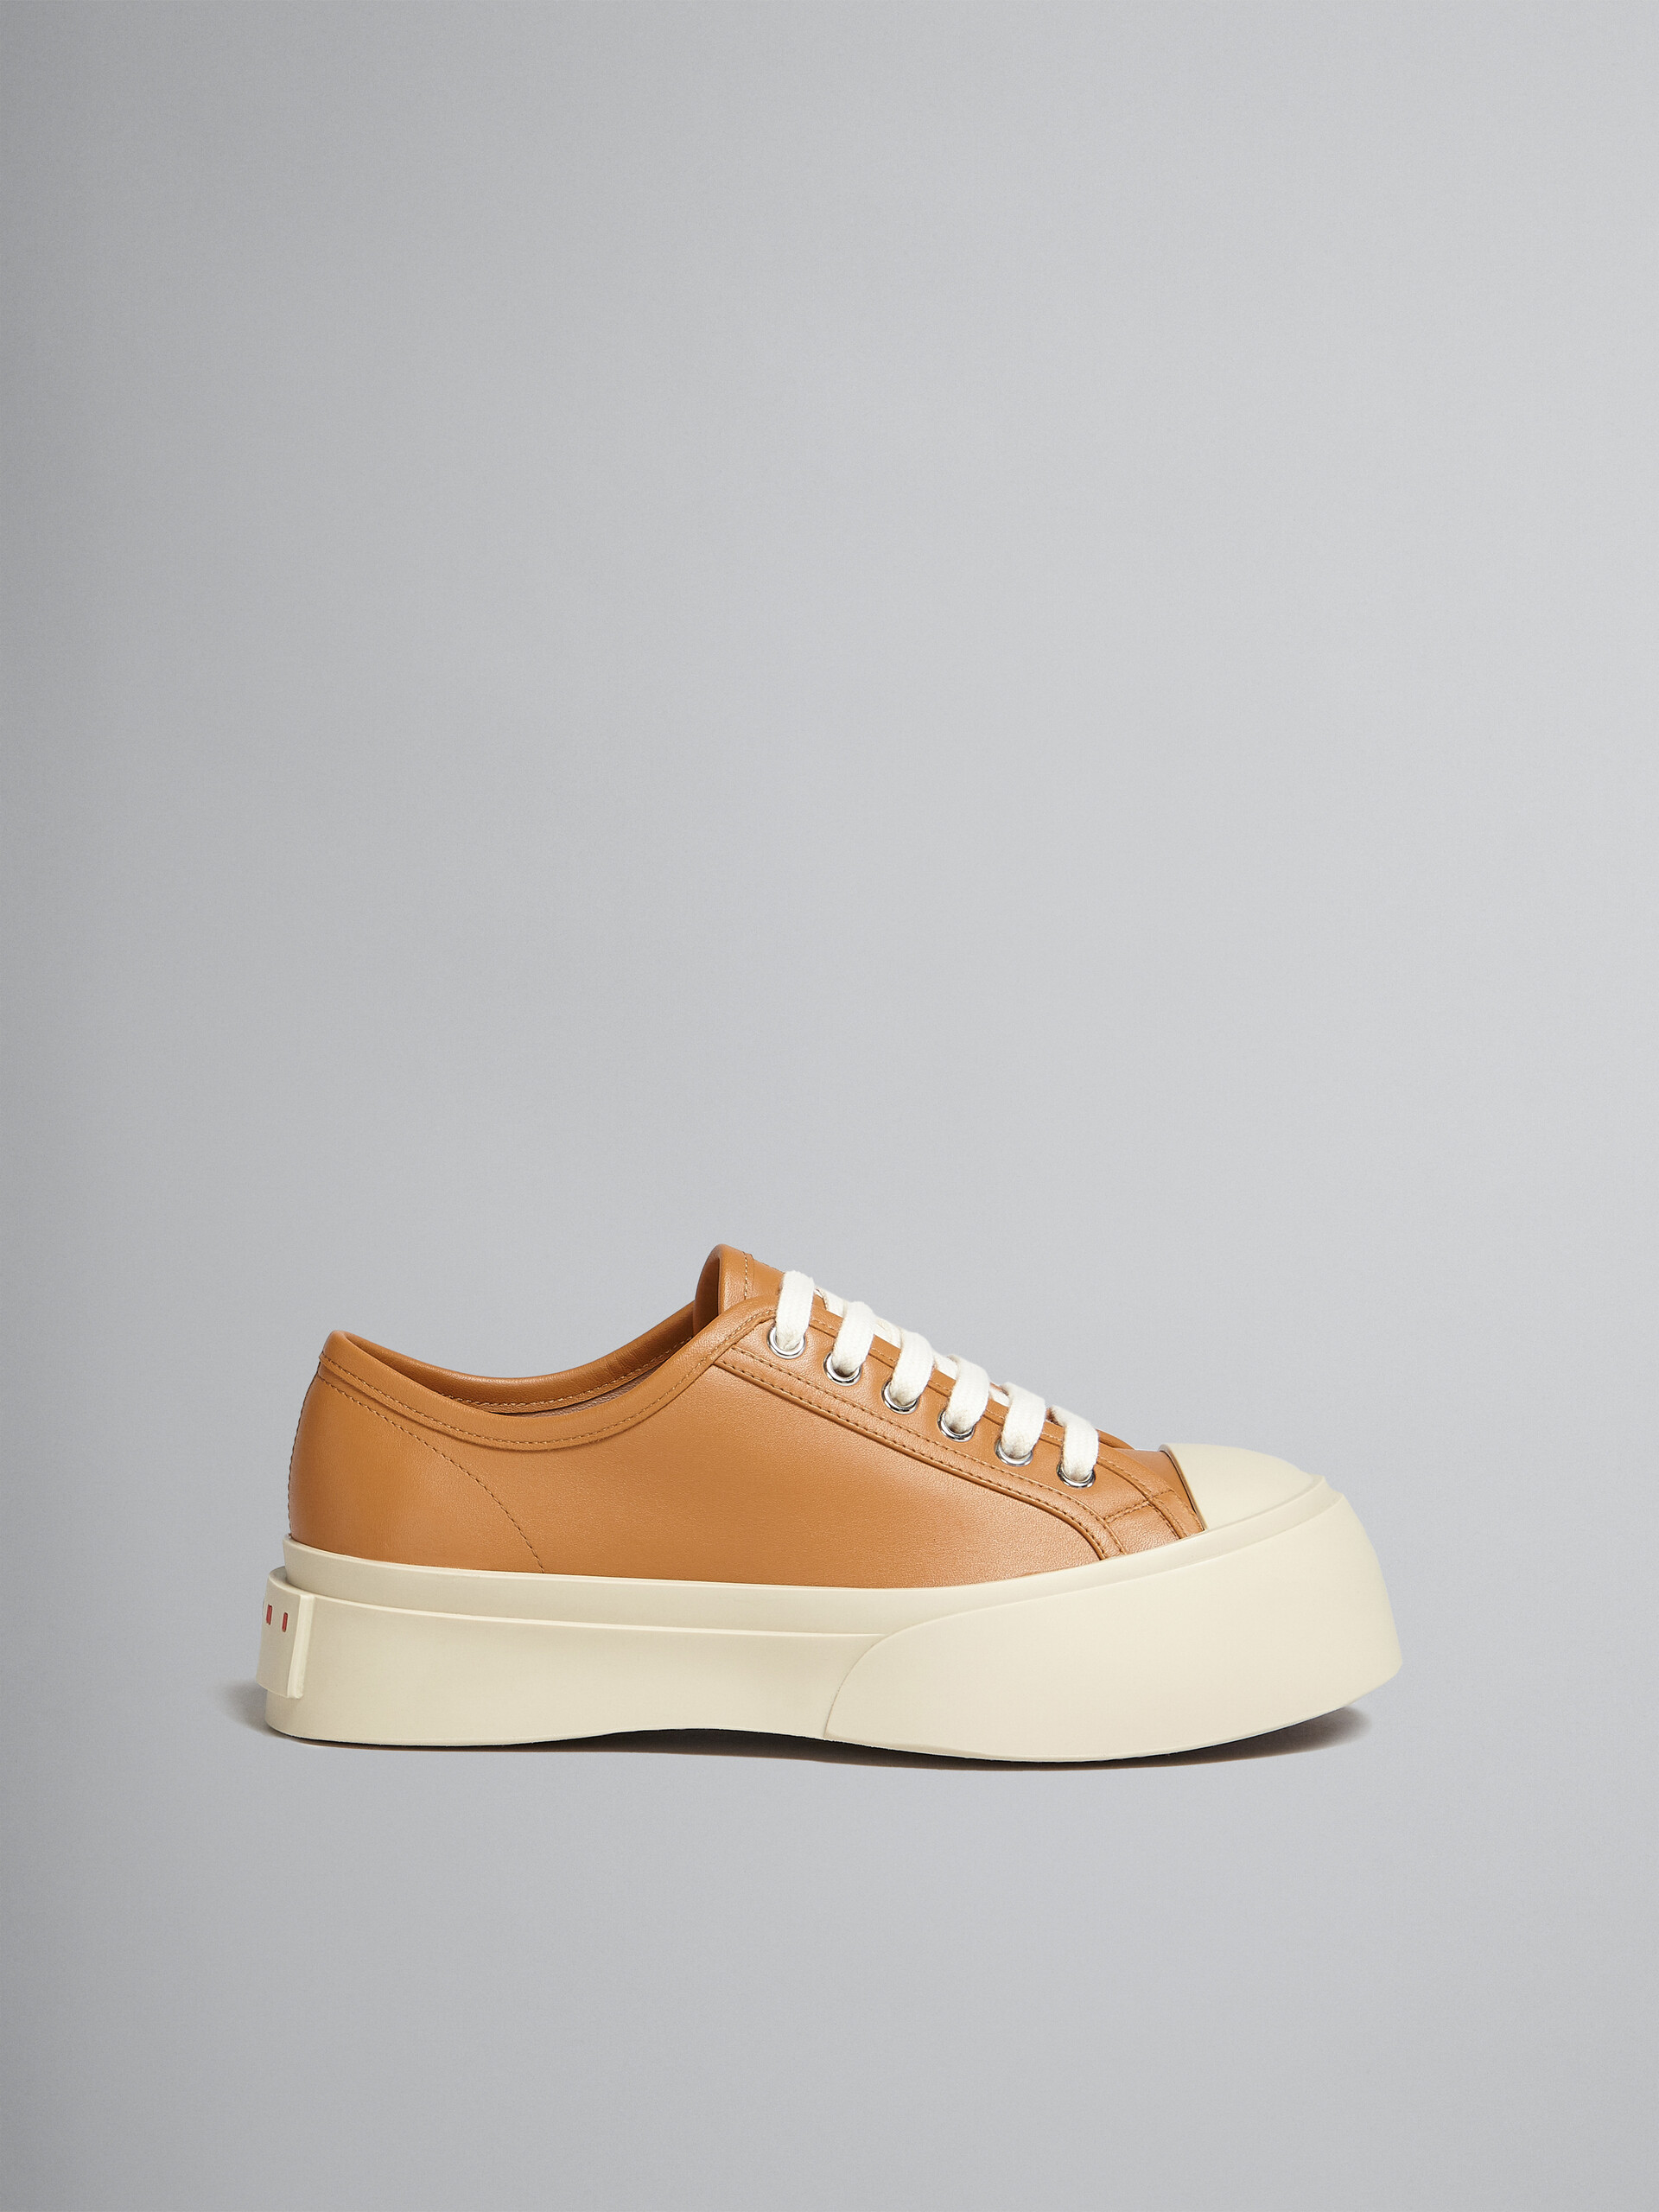 Brown nappa leather Pablo lace-up sneaker - Sneakers - Image 1